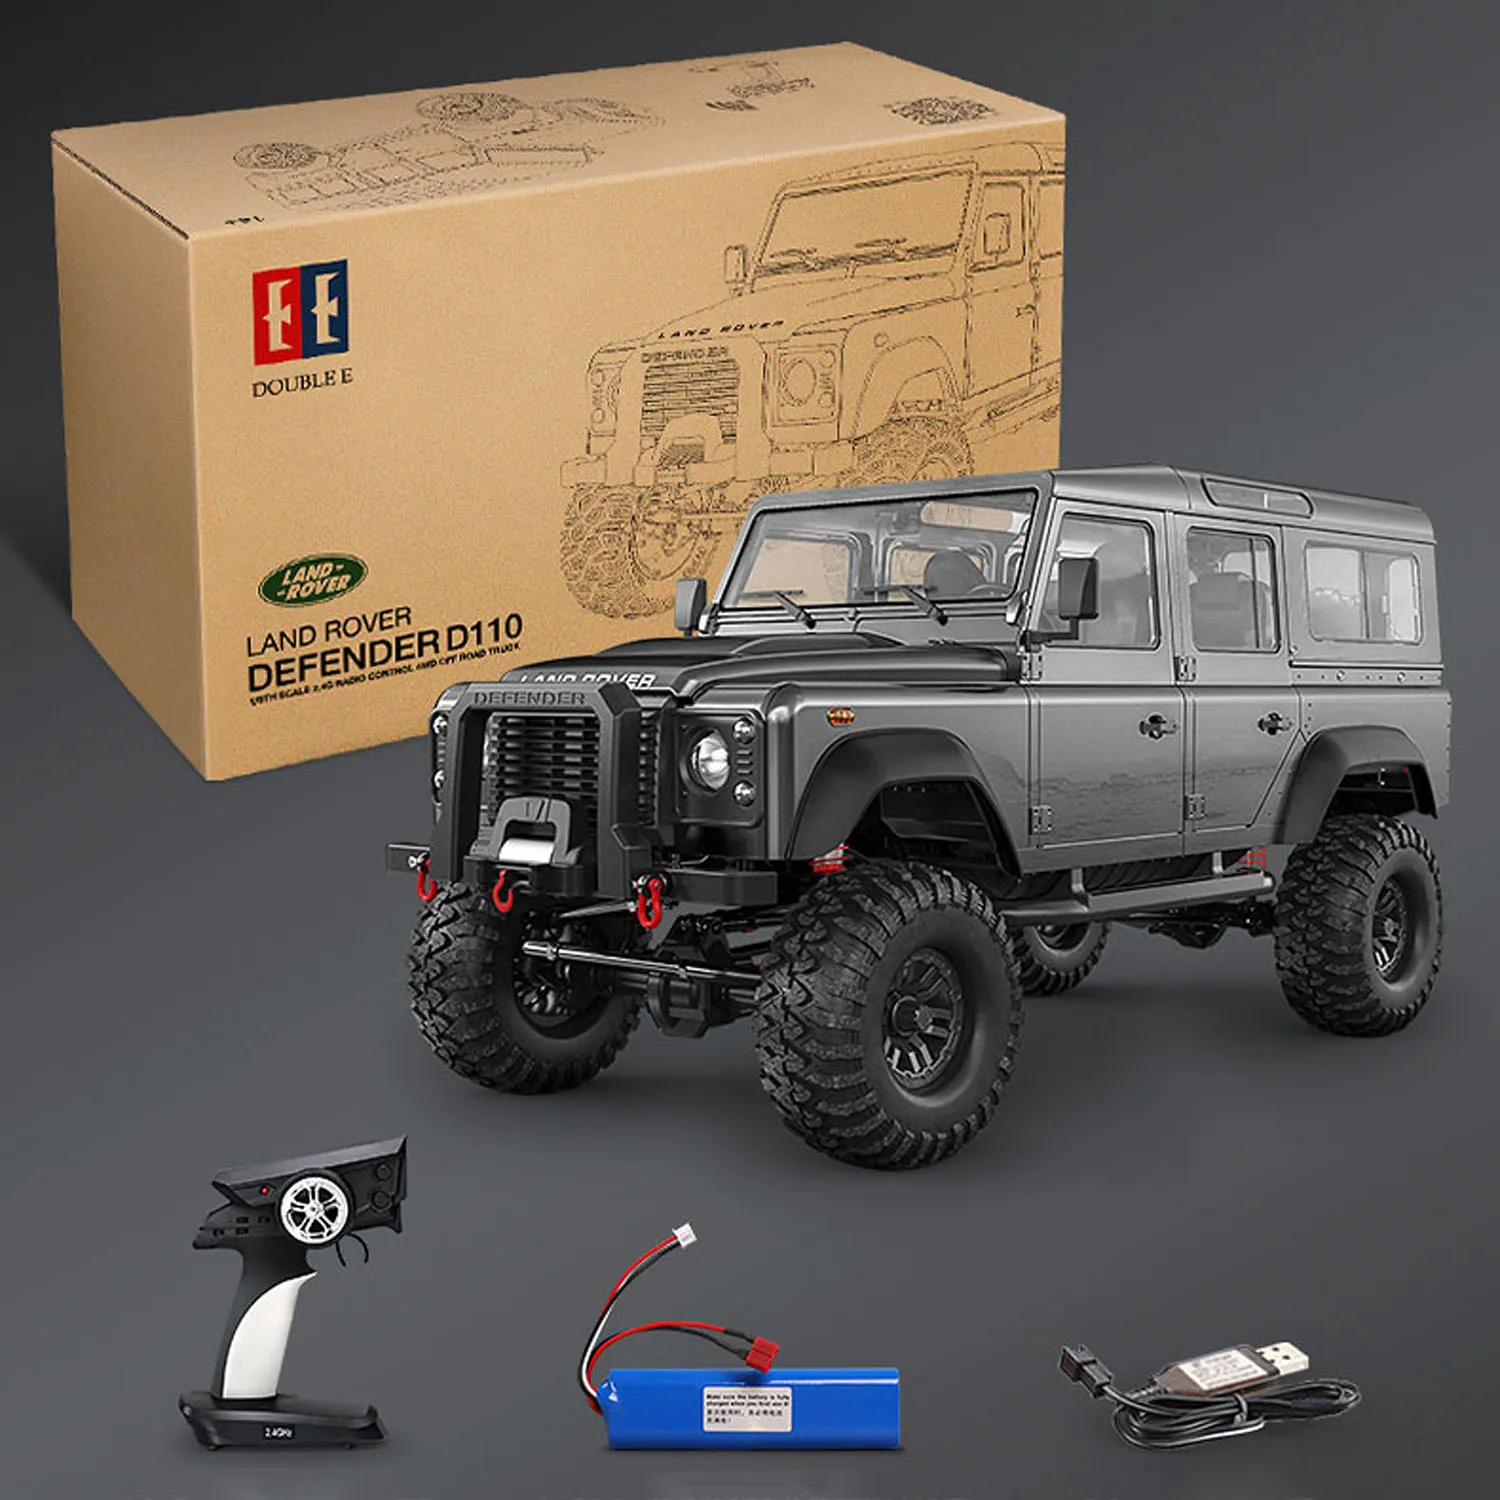 

1/8 4x4 RC Crawler Car Double E D110 E102-003 4WD 2-Speed Transmission Controlled Five Door Off-Road Climbing Vehicle Model Toys